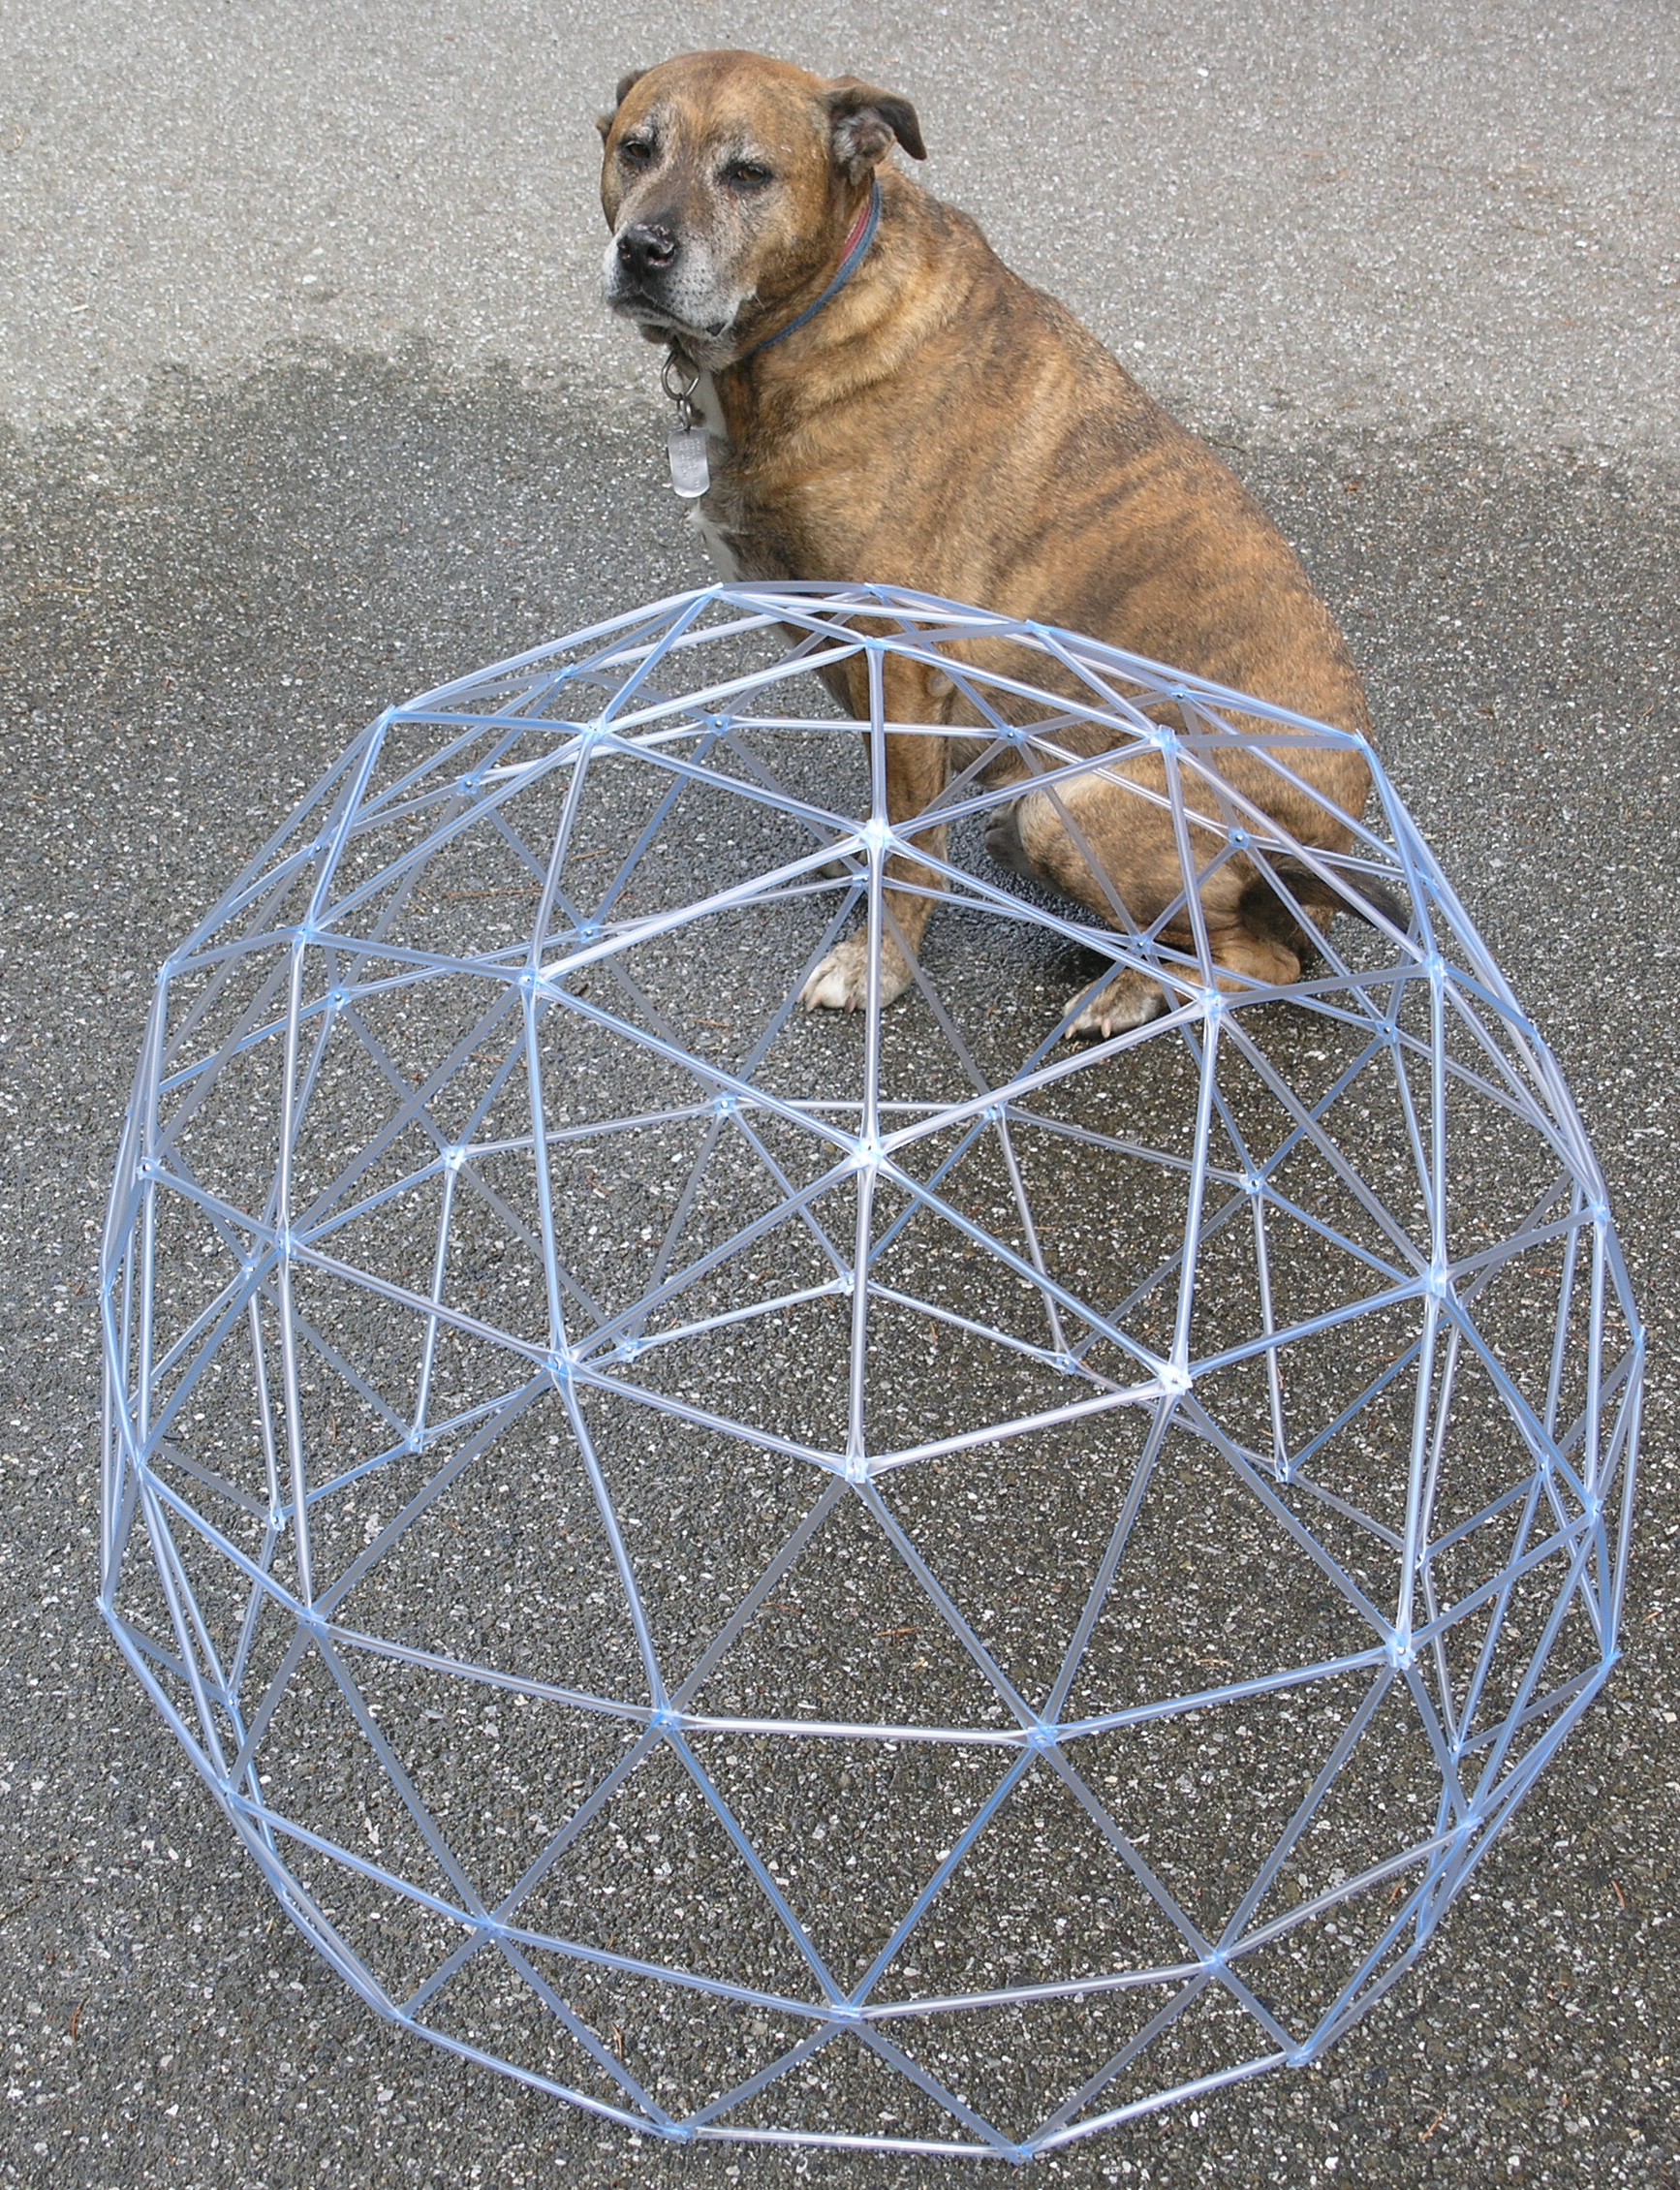 Dog and dome